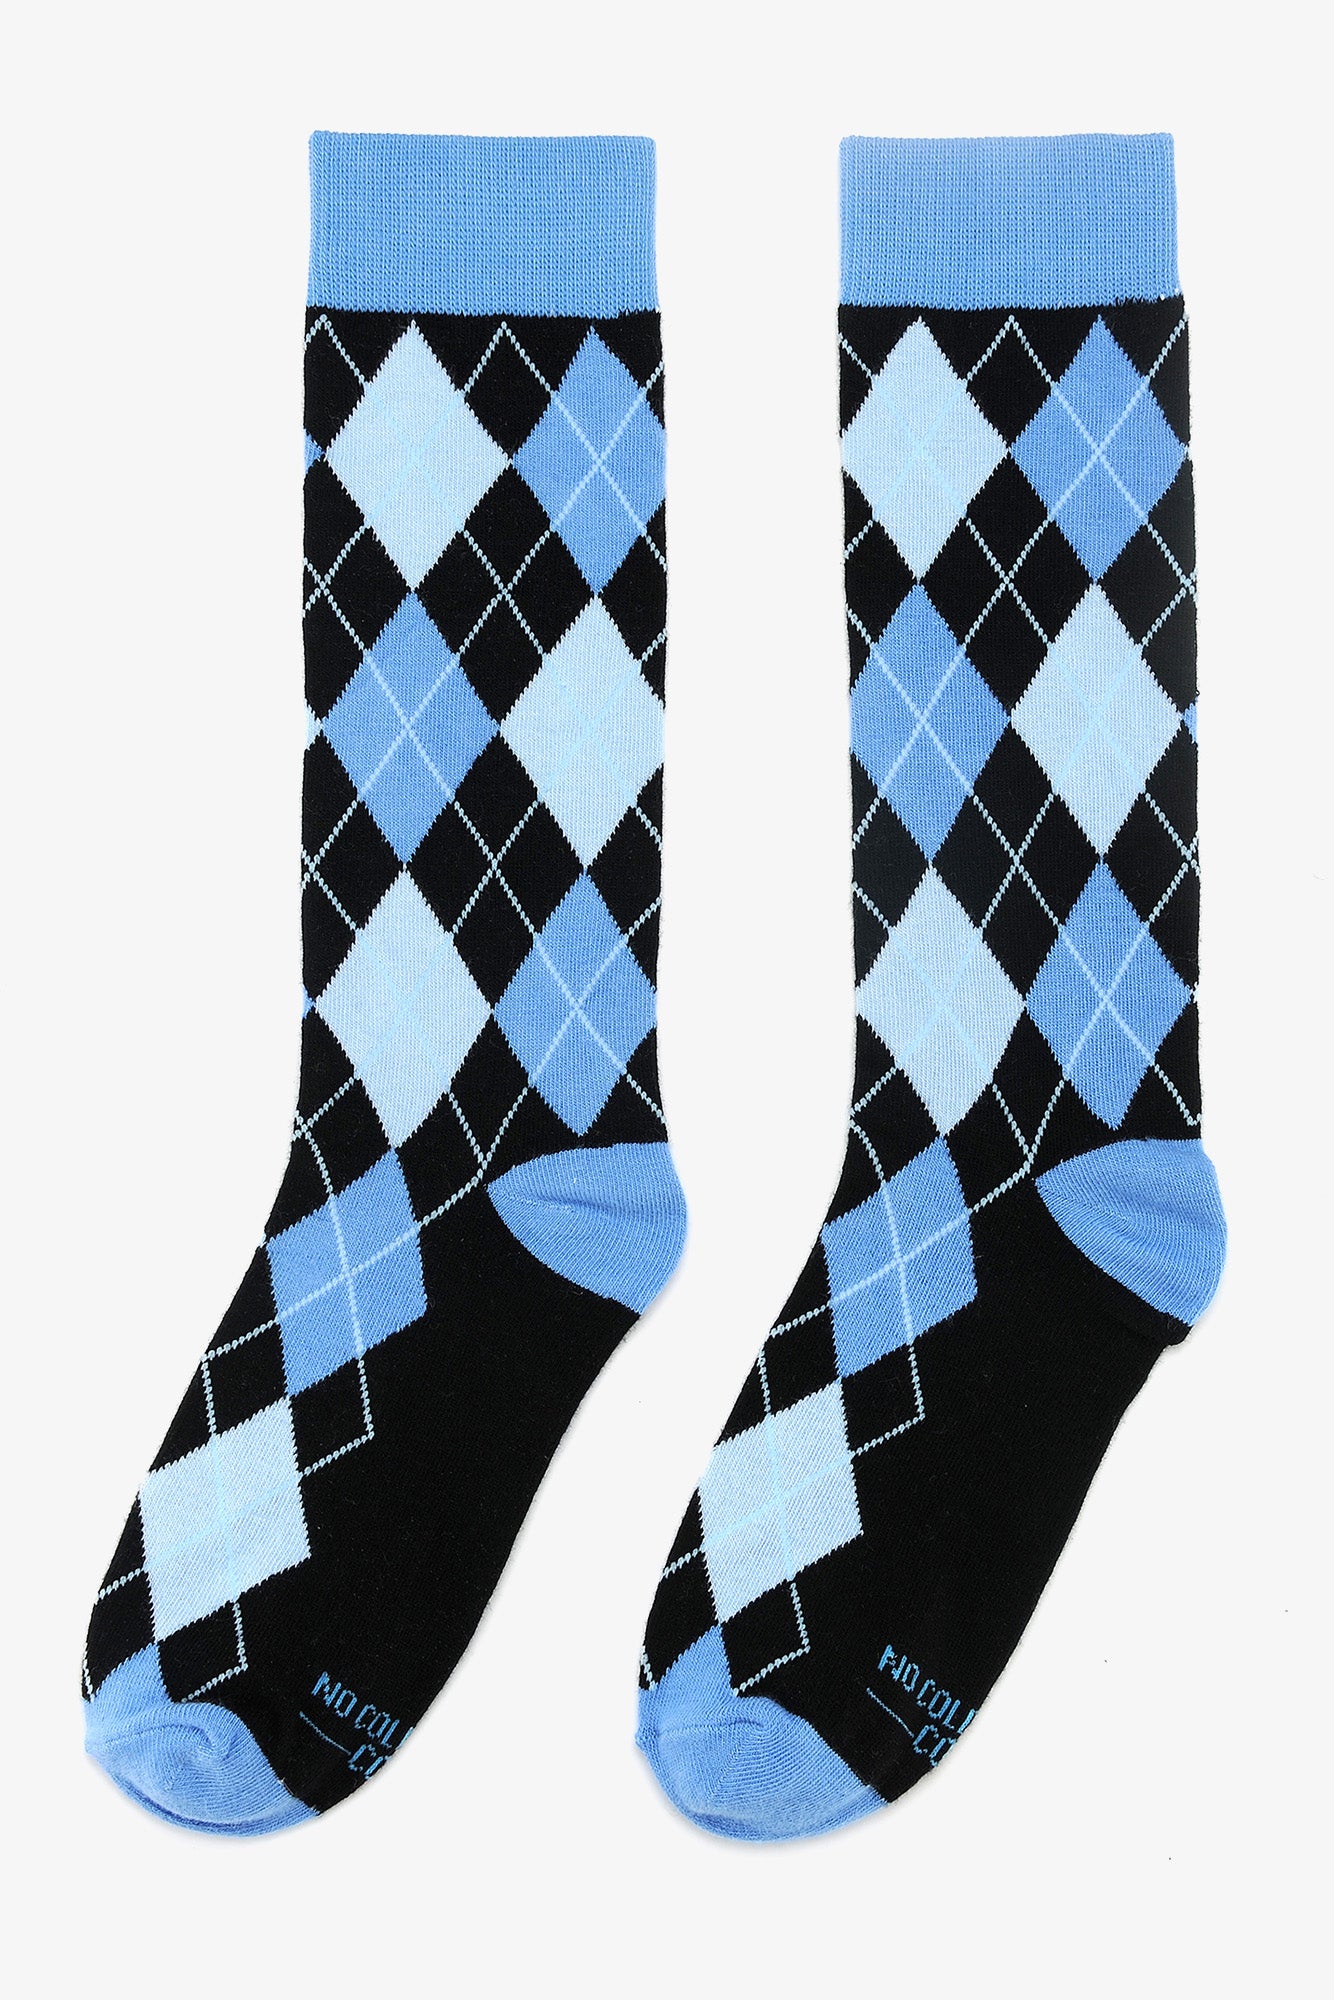 Blue and Black Argyle Groomsmen Socks by No Cold Feet